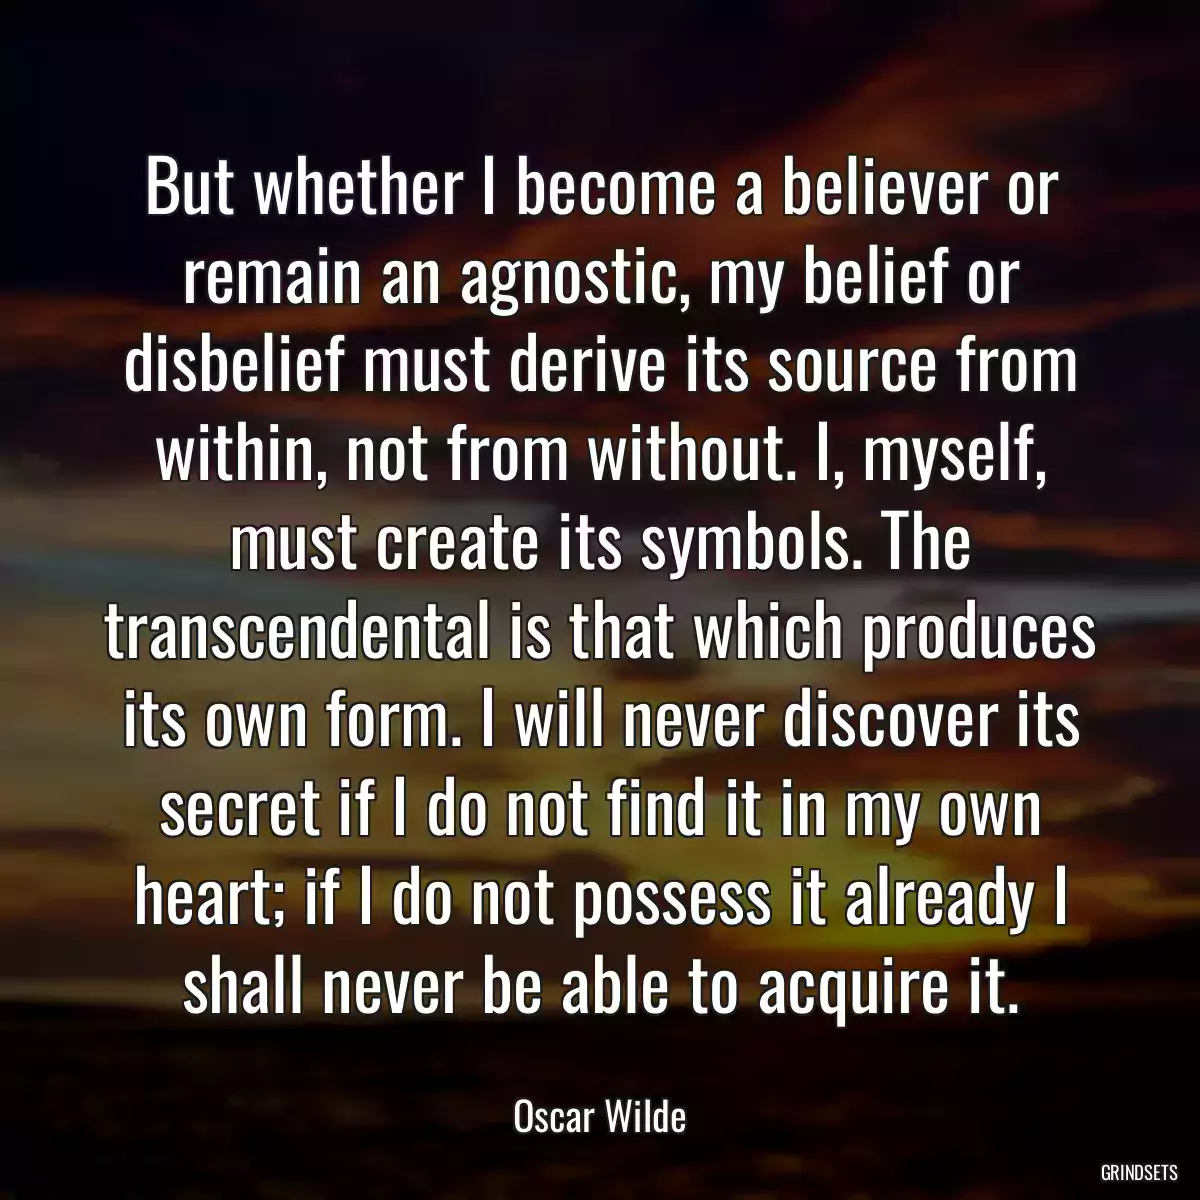 But whether I become a believer or remain an agnostic, my belief or disbelief must derive its source from within, not from without. I, myself, must create its symbols. The transcendental is that which produces its own form. I will never discover its secret if I do not find it in my own heart; if I do not possess it already I shall never be able to acquire it.